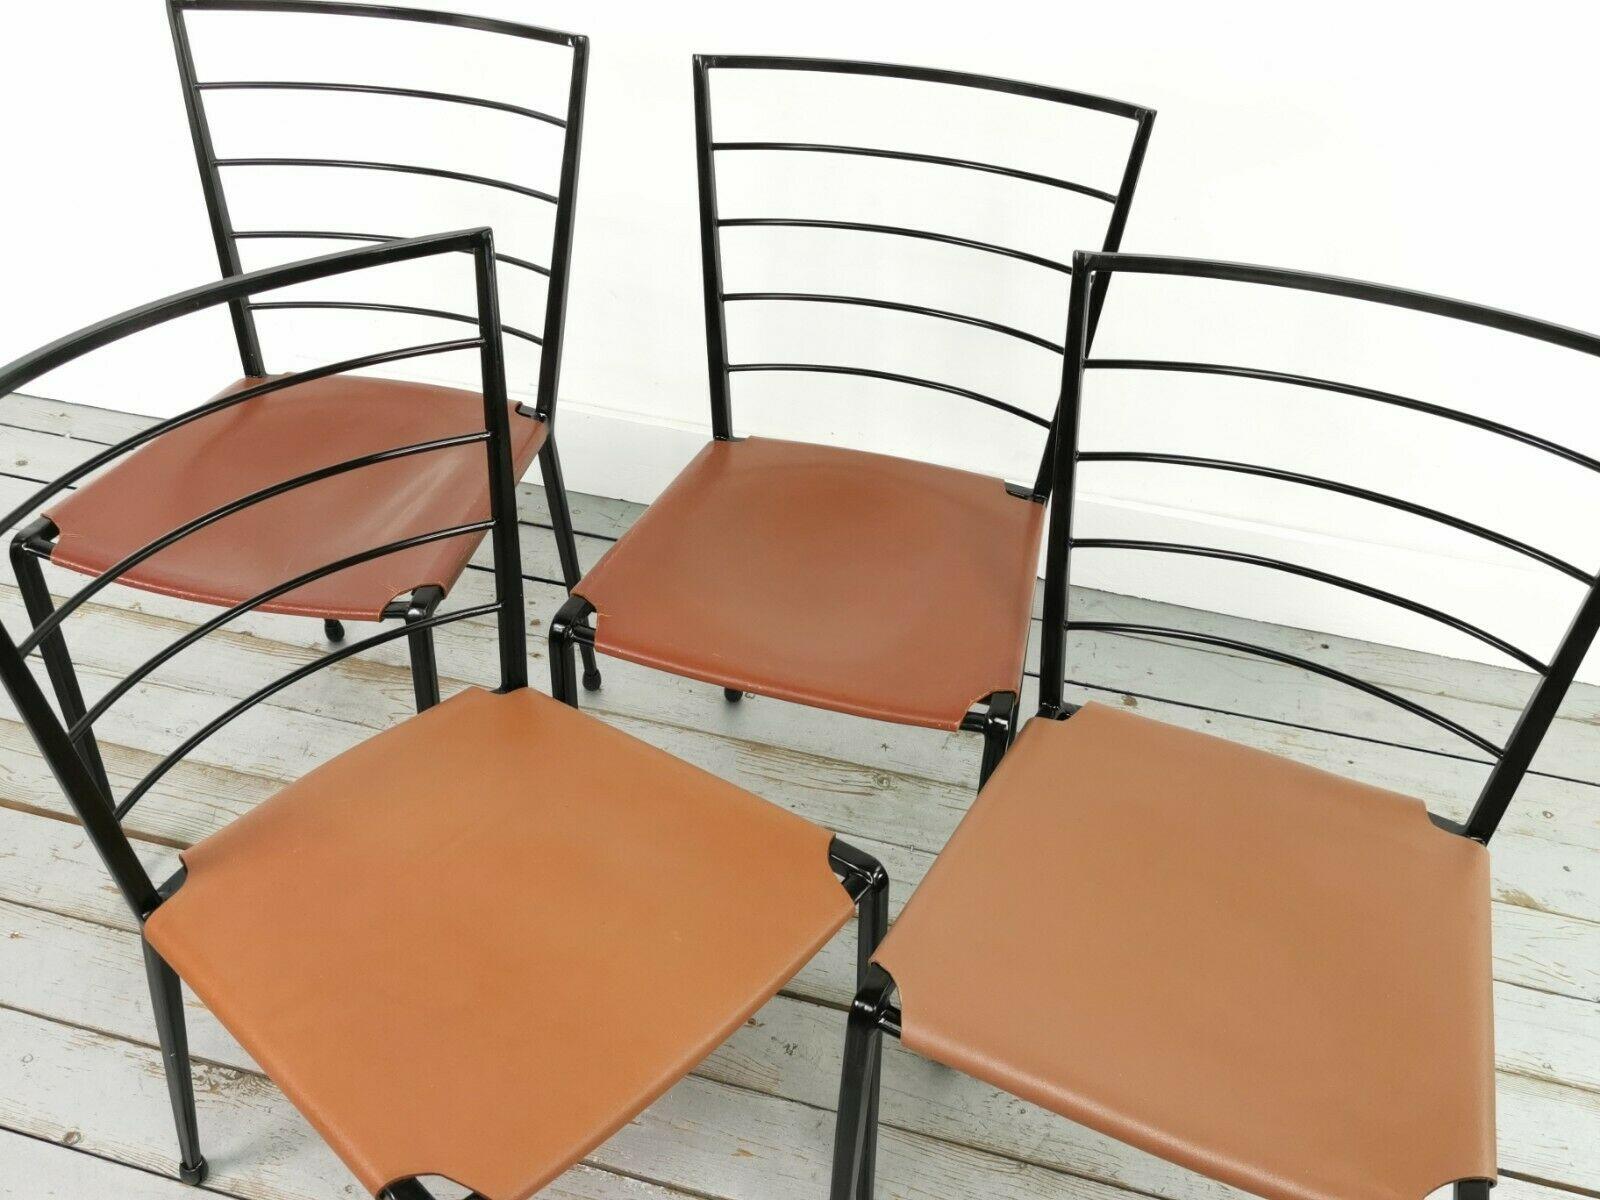 Ladderax dining chairs

Original scarcely seen set of four Ladderax dining chairs.

Robert Heal designed this chair for Staples in the 1960s. These are excellent examples that feature a sturdy black steel frame with the original tan leather